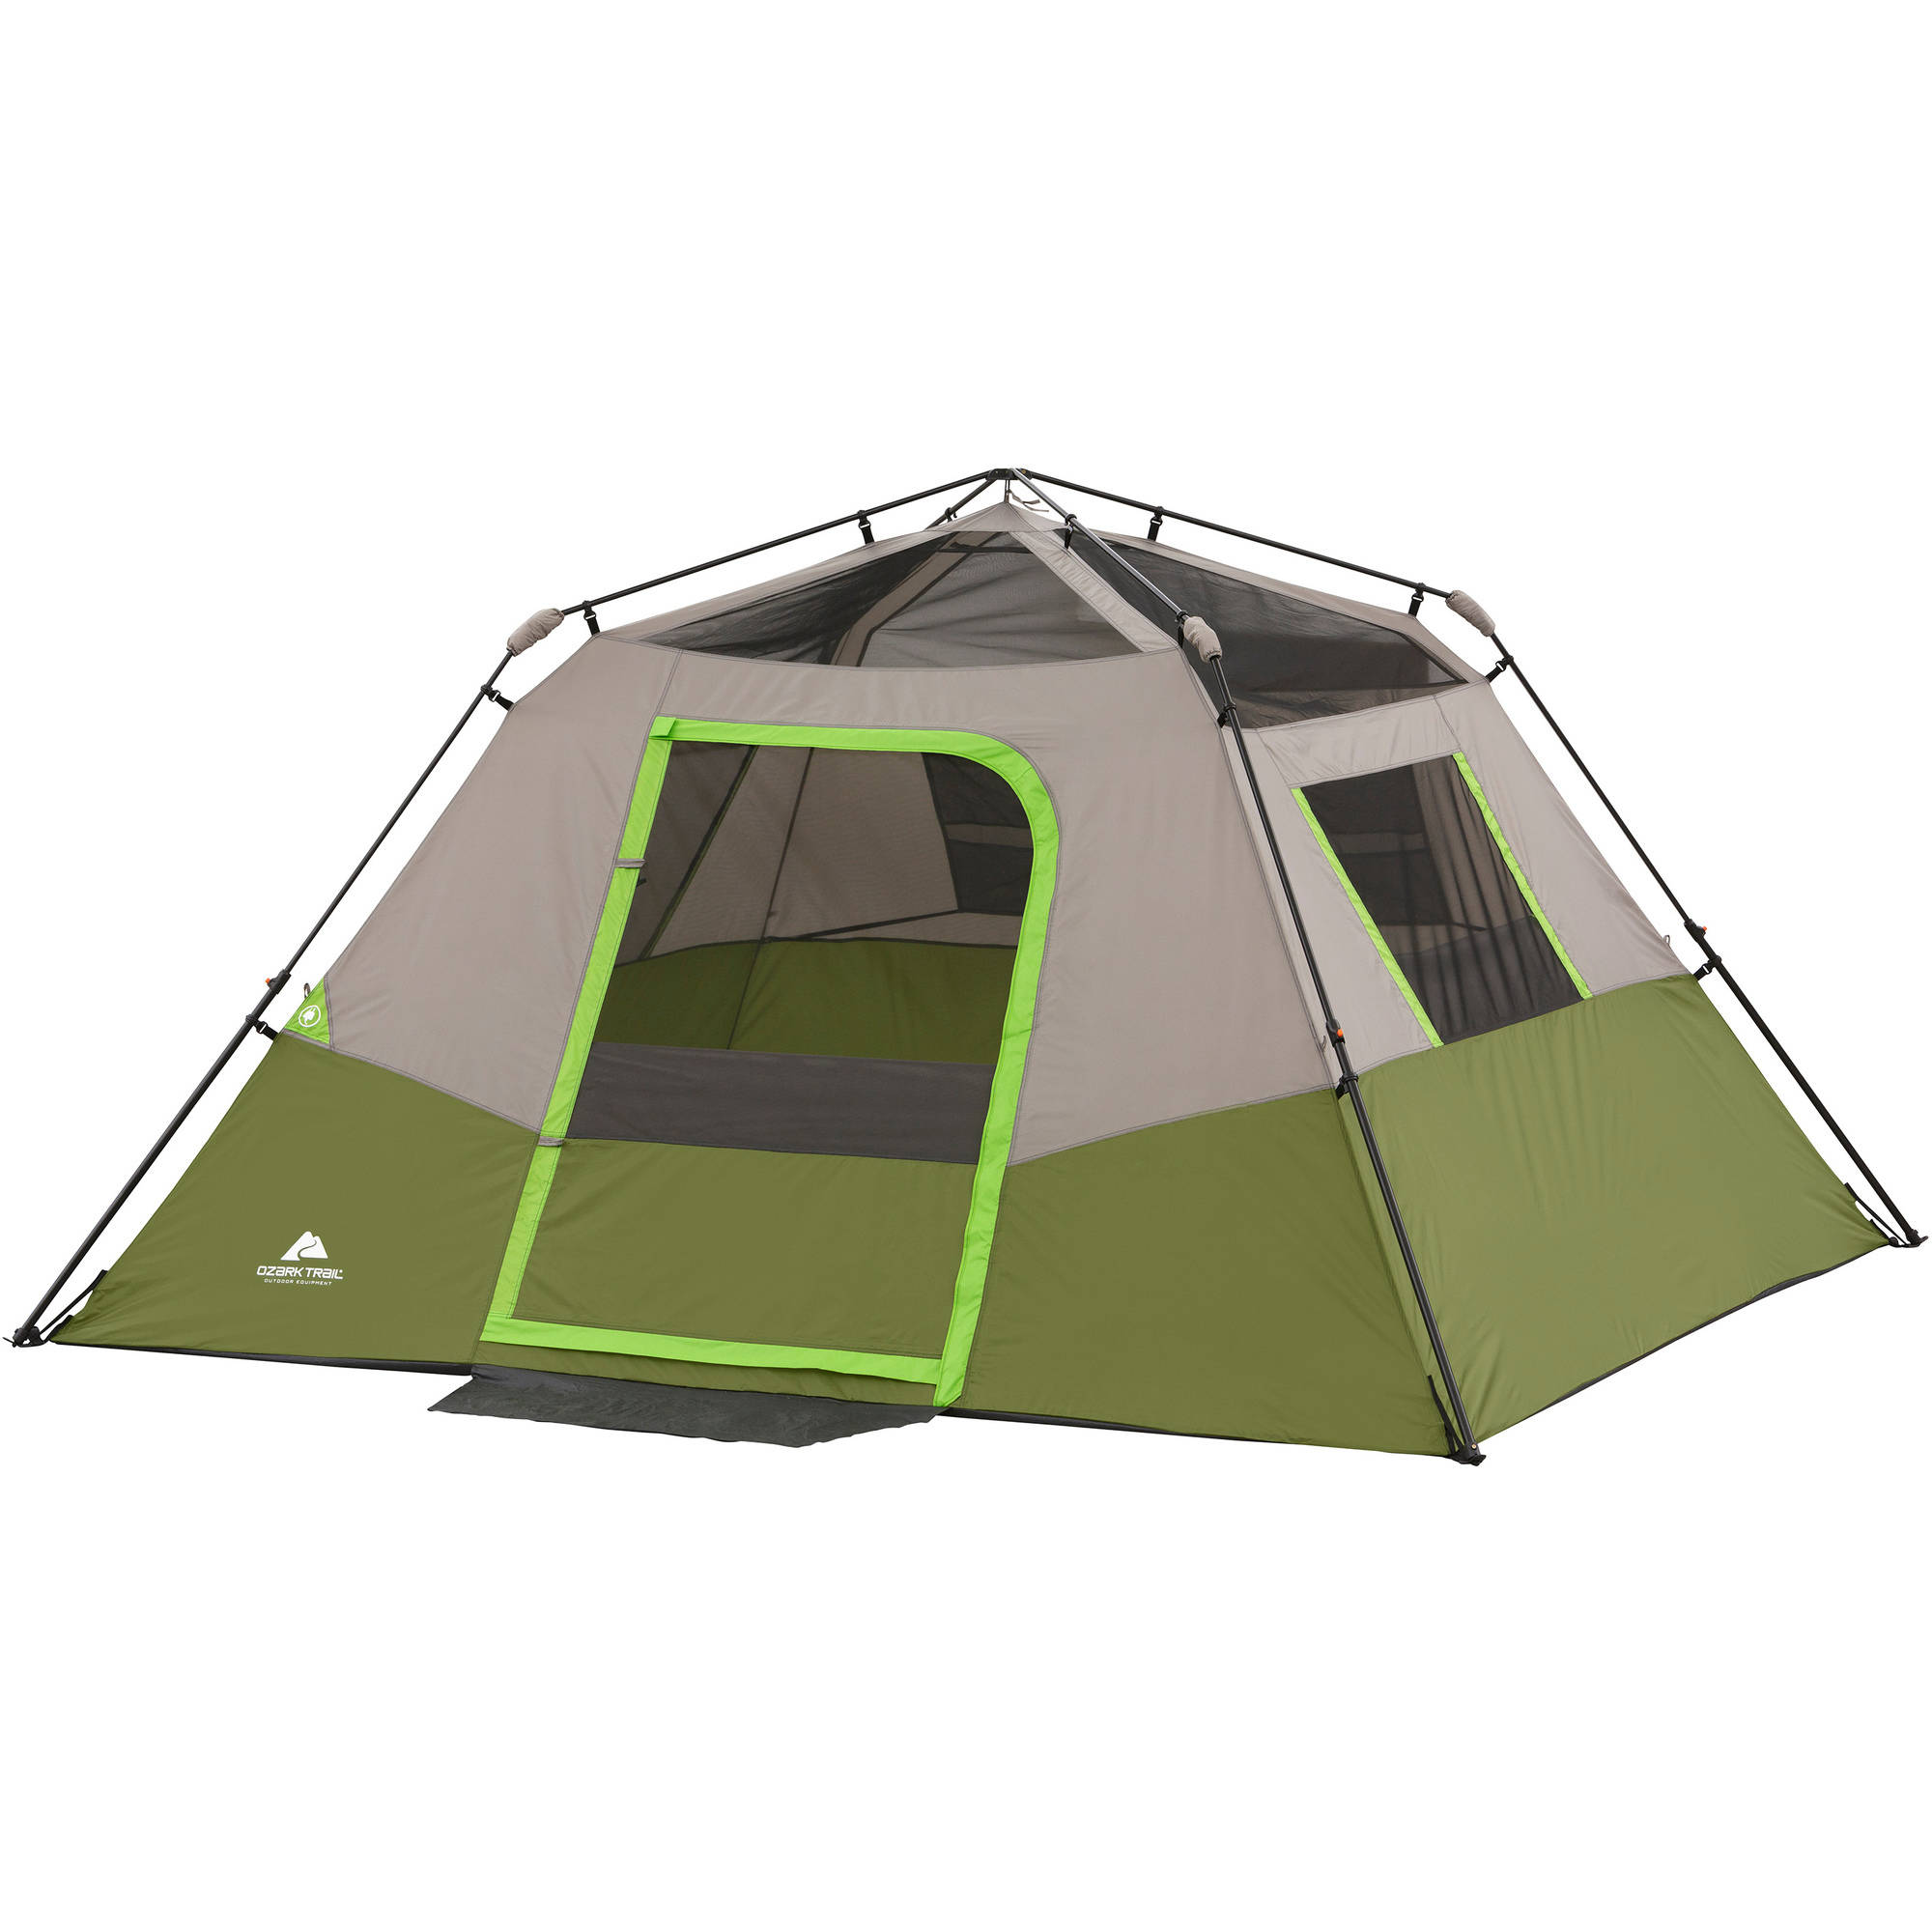 Ozark Trail 6 Person Instant Cabin Tent - image 2 of 8